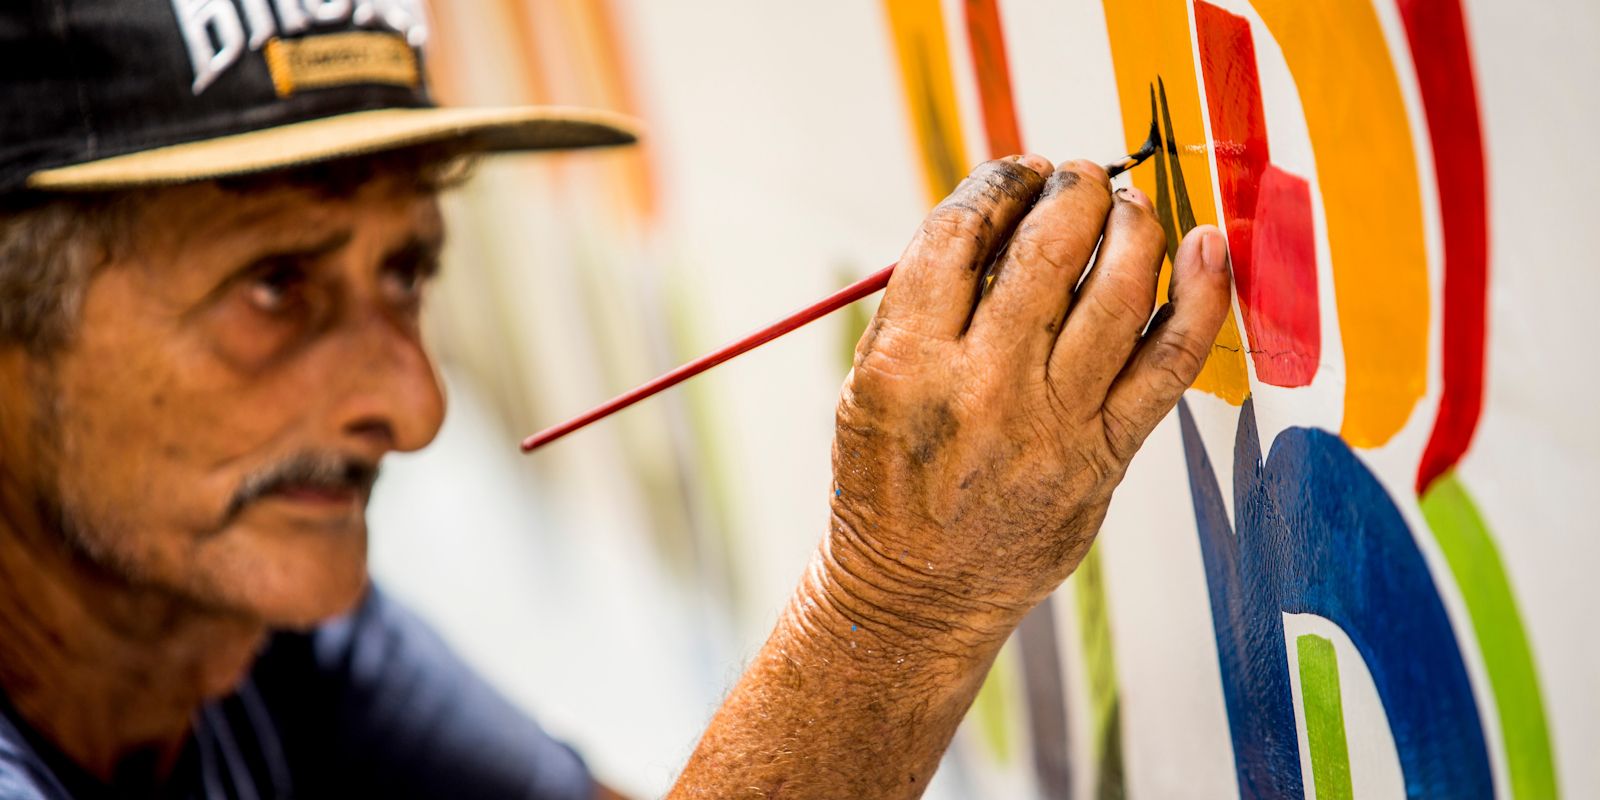 Close-up of a man in a baseball cap painting a brightly coloured letter on the side of a boat.